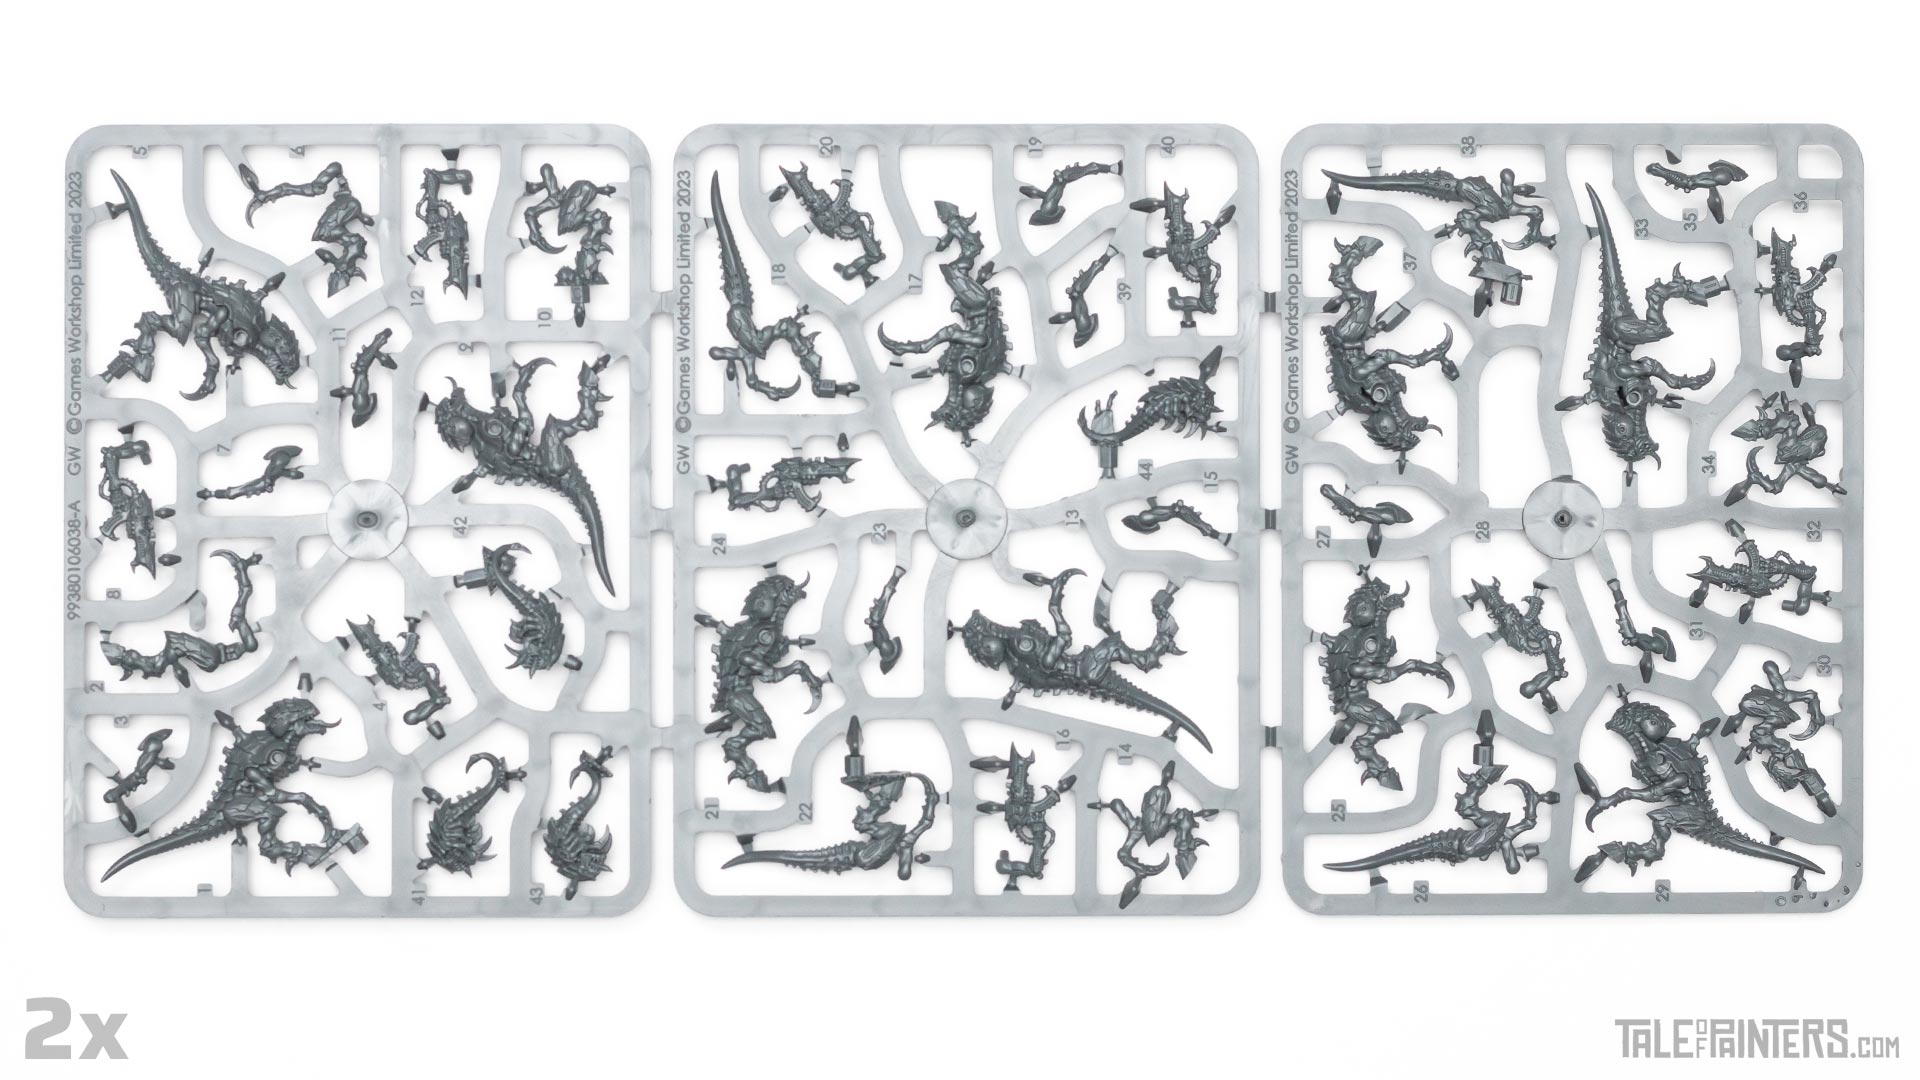 Leviathan Tyranids Termagants sprue (included twice)